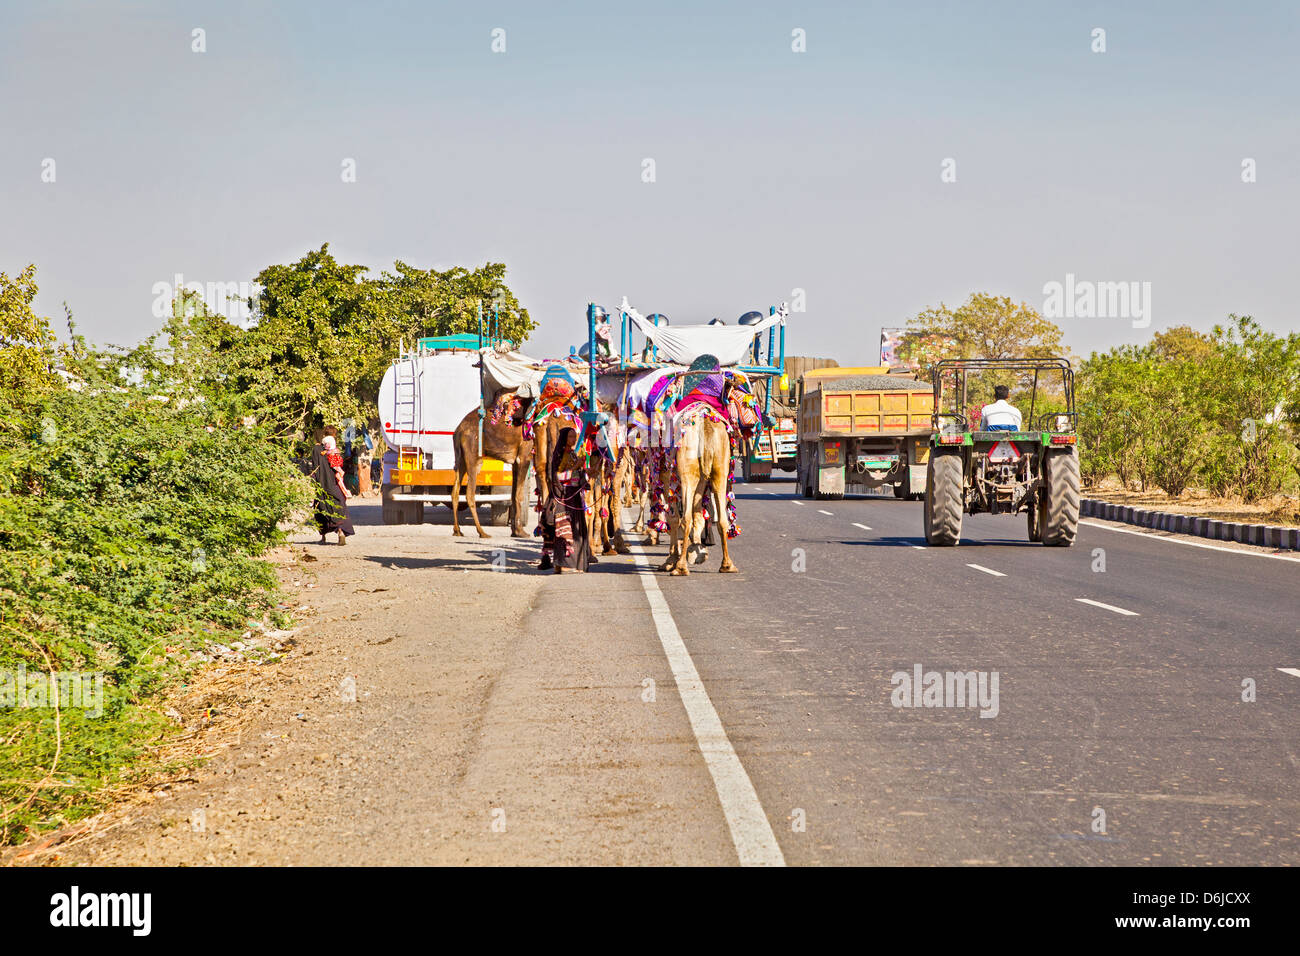 Ahmedabad Road in Gujarat India of typical congestion on India highways of users moving at different speeds and agendas Stock Photo